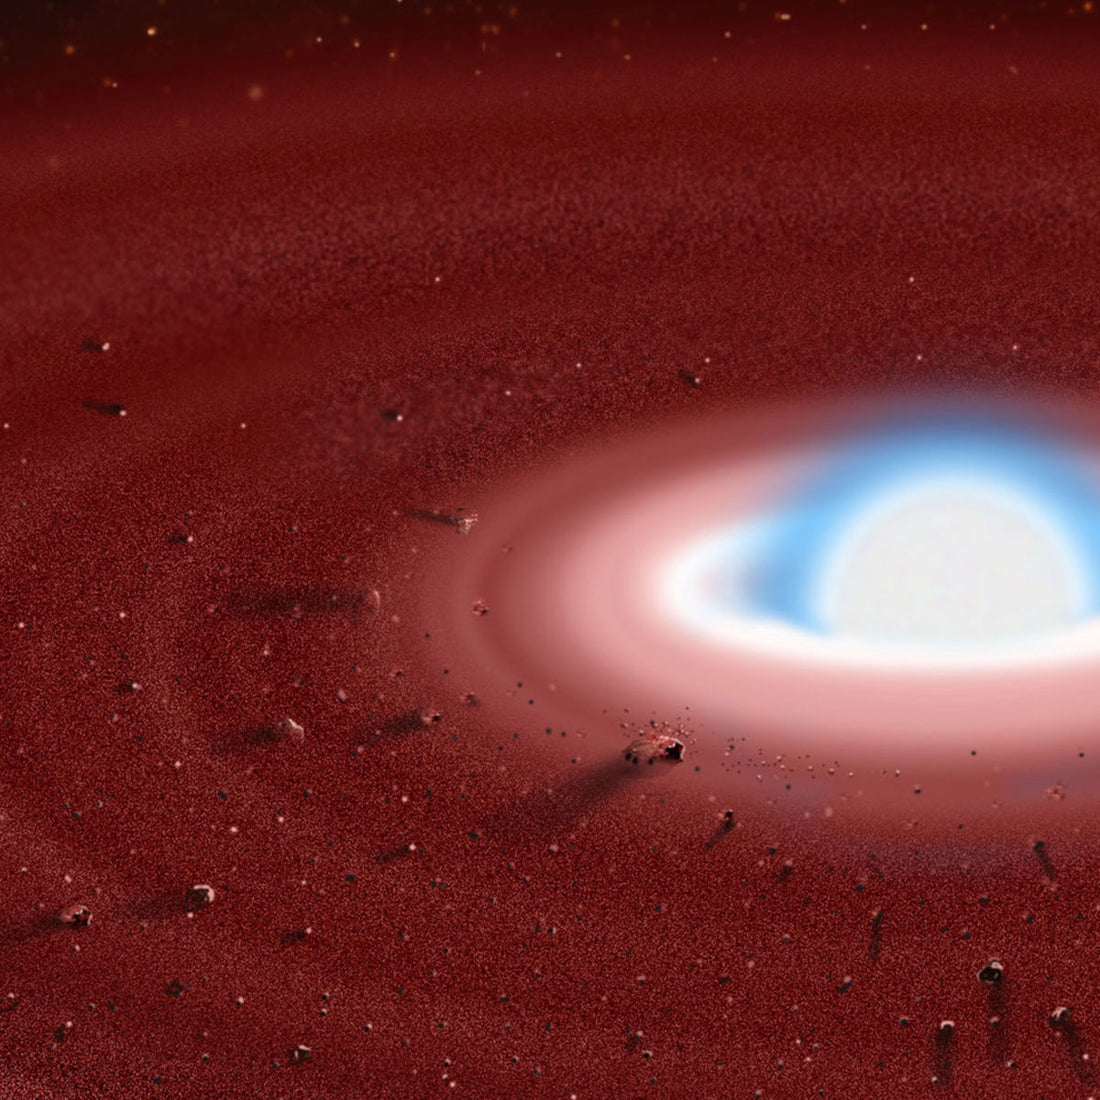 A Dead Star Is Eating Its Own Planets